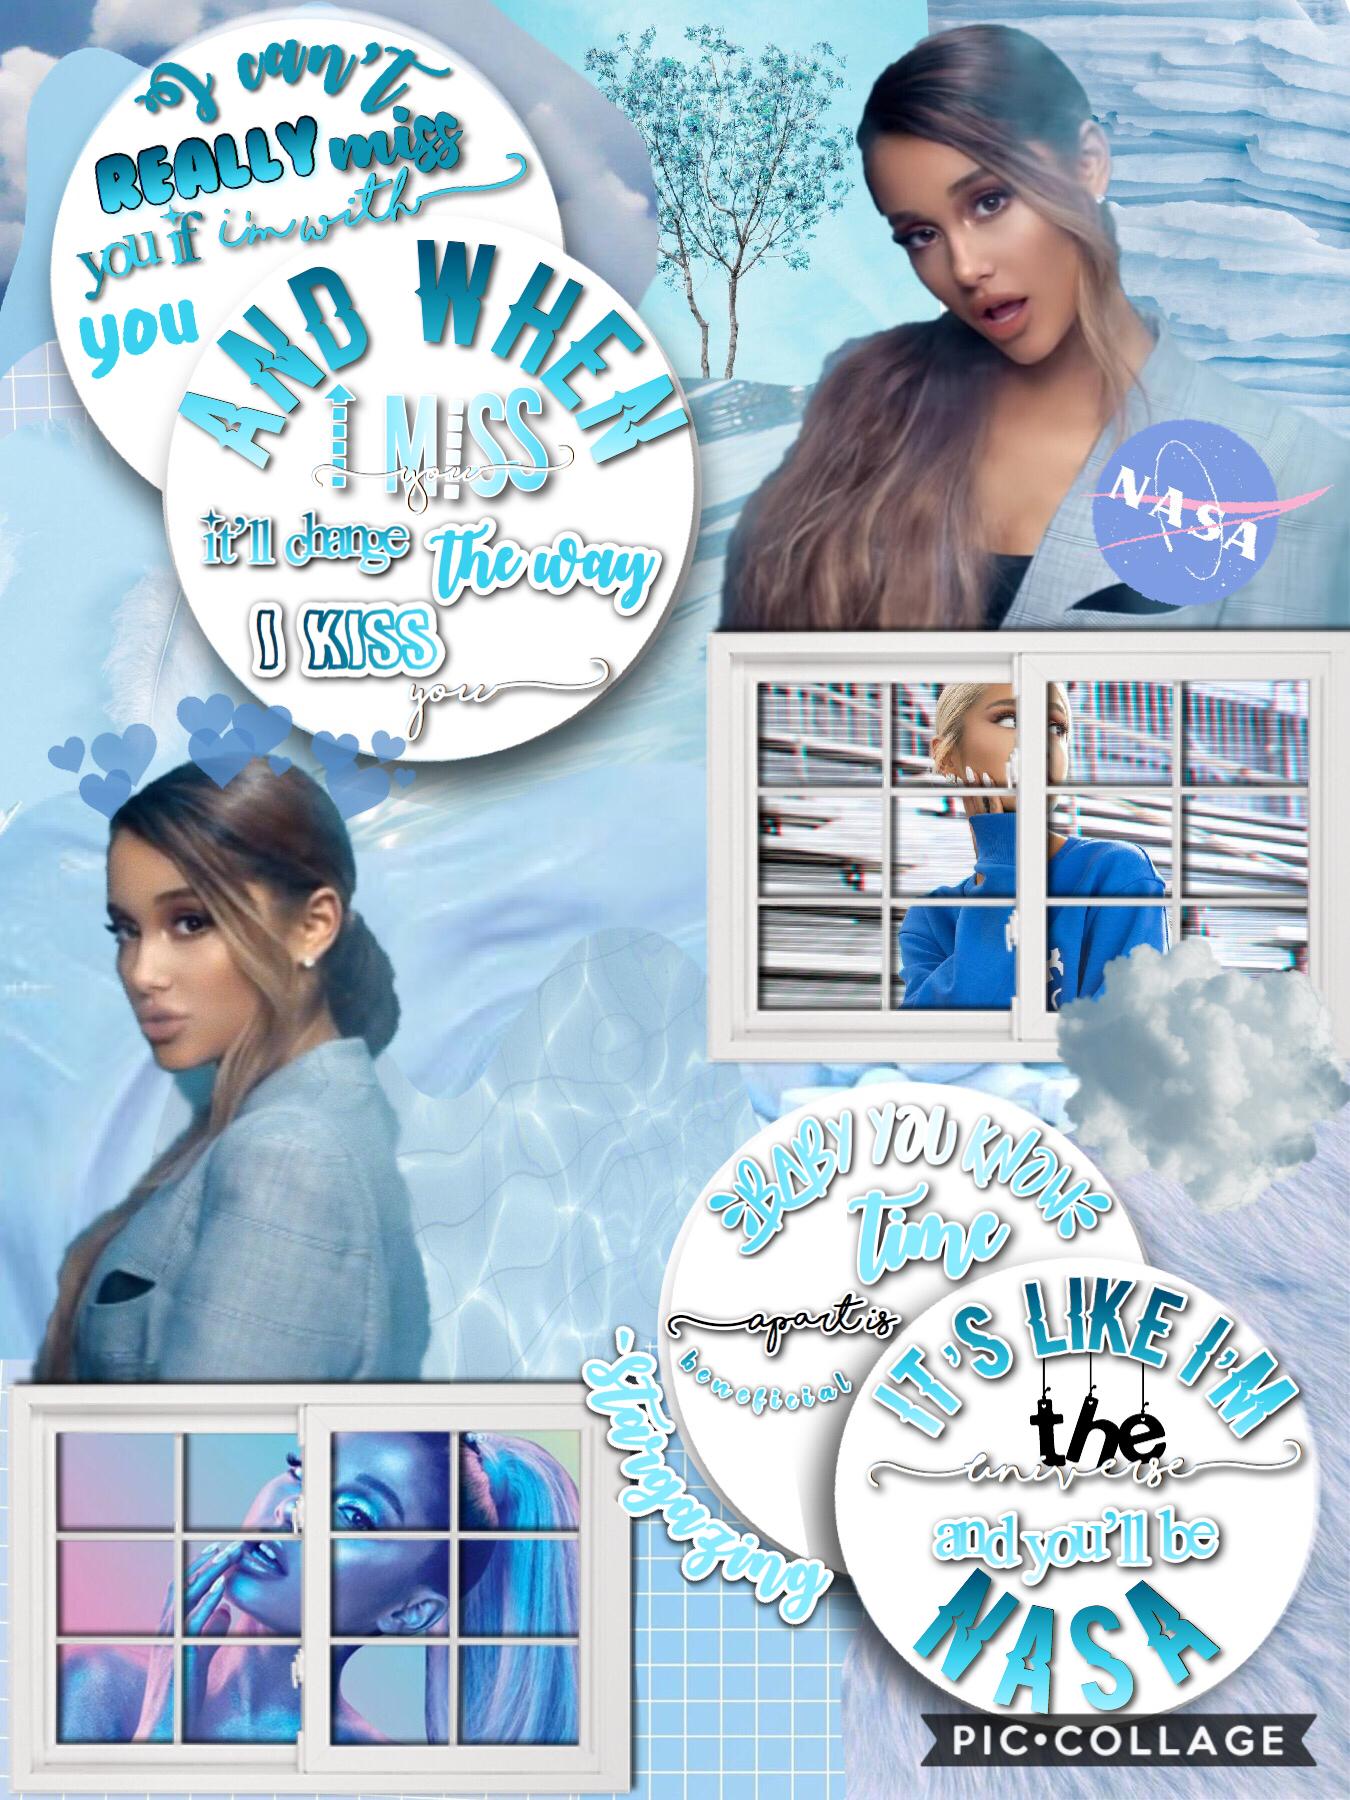 💙t a p💙
This is for @-VSCOVIBES- 
Ariana Grande contest! 
I’m the first to enter! Plz 
enter! Almost at 1.1K!